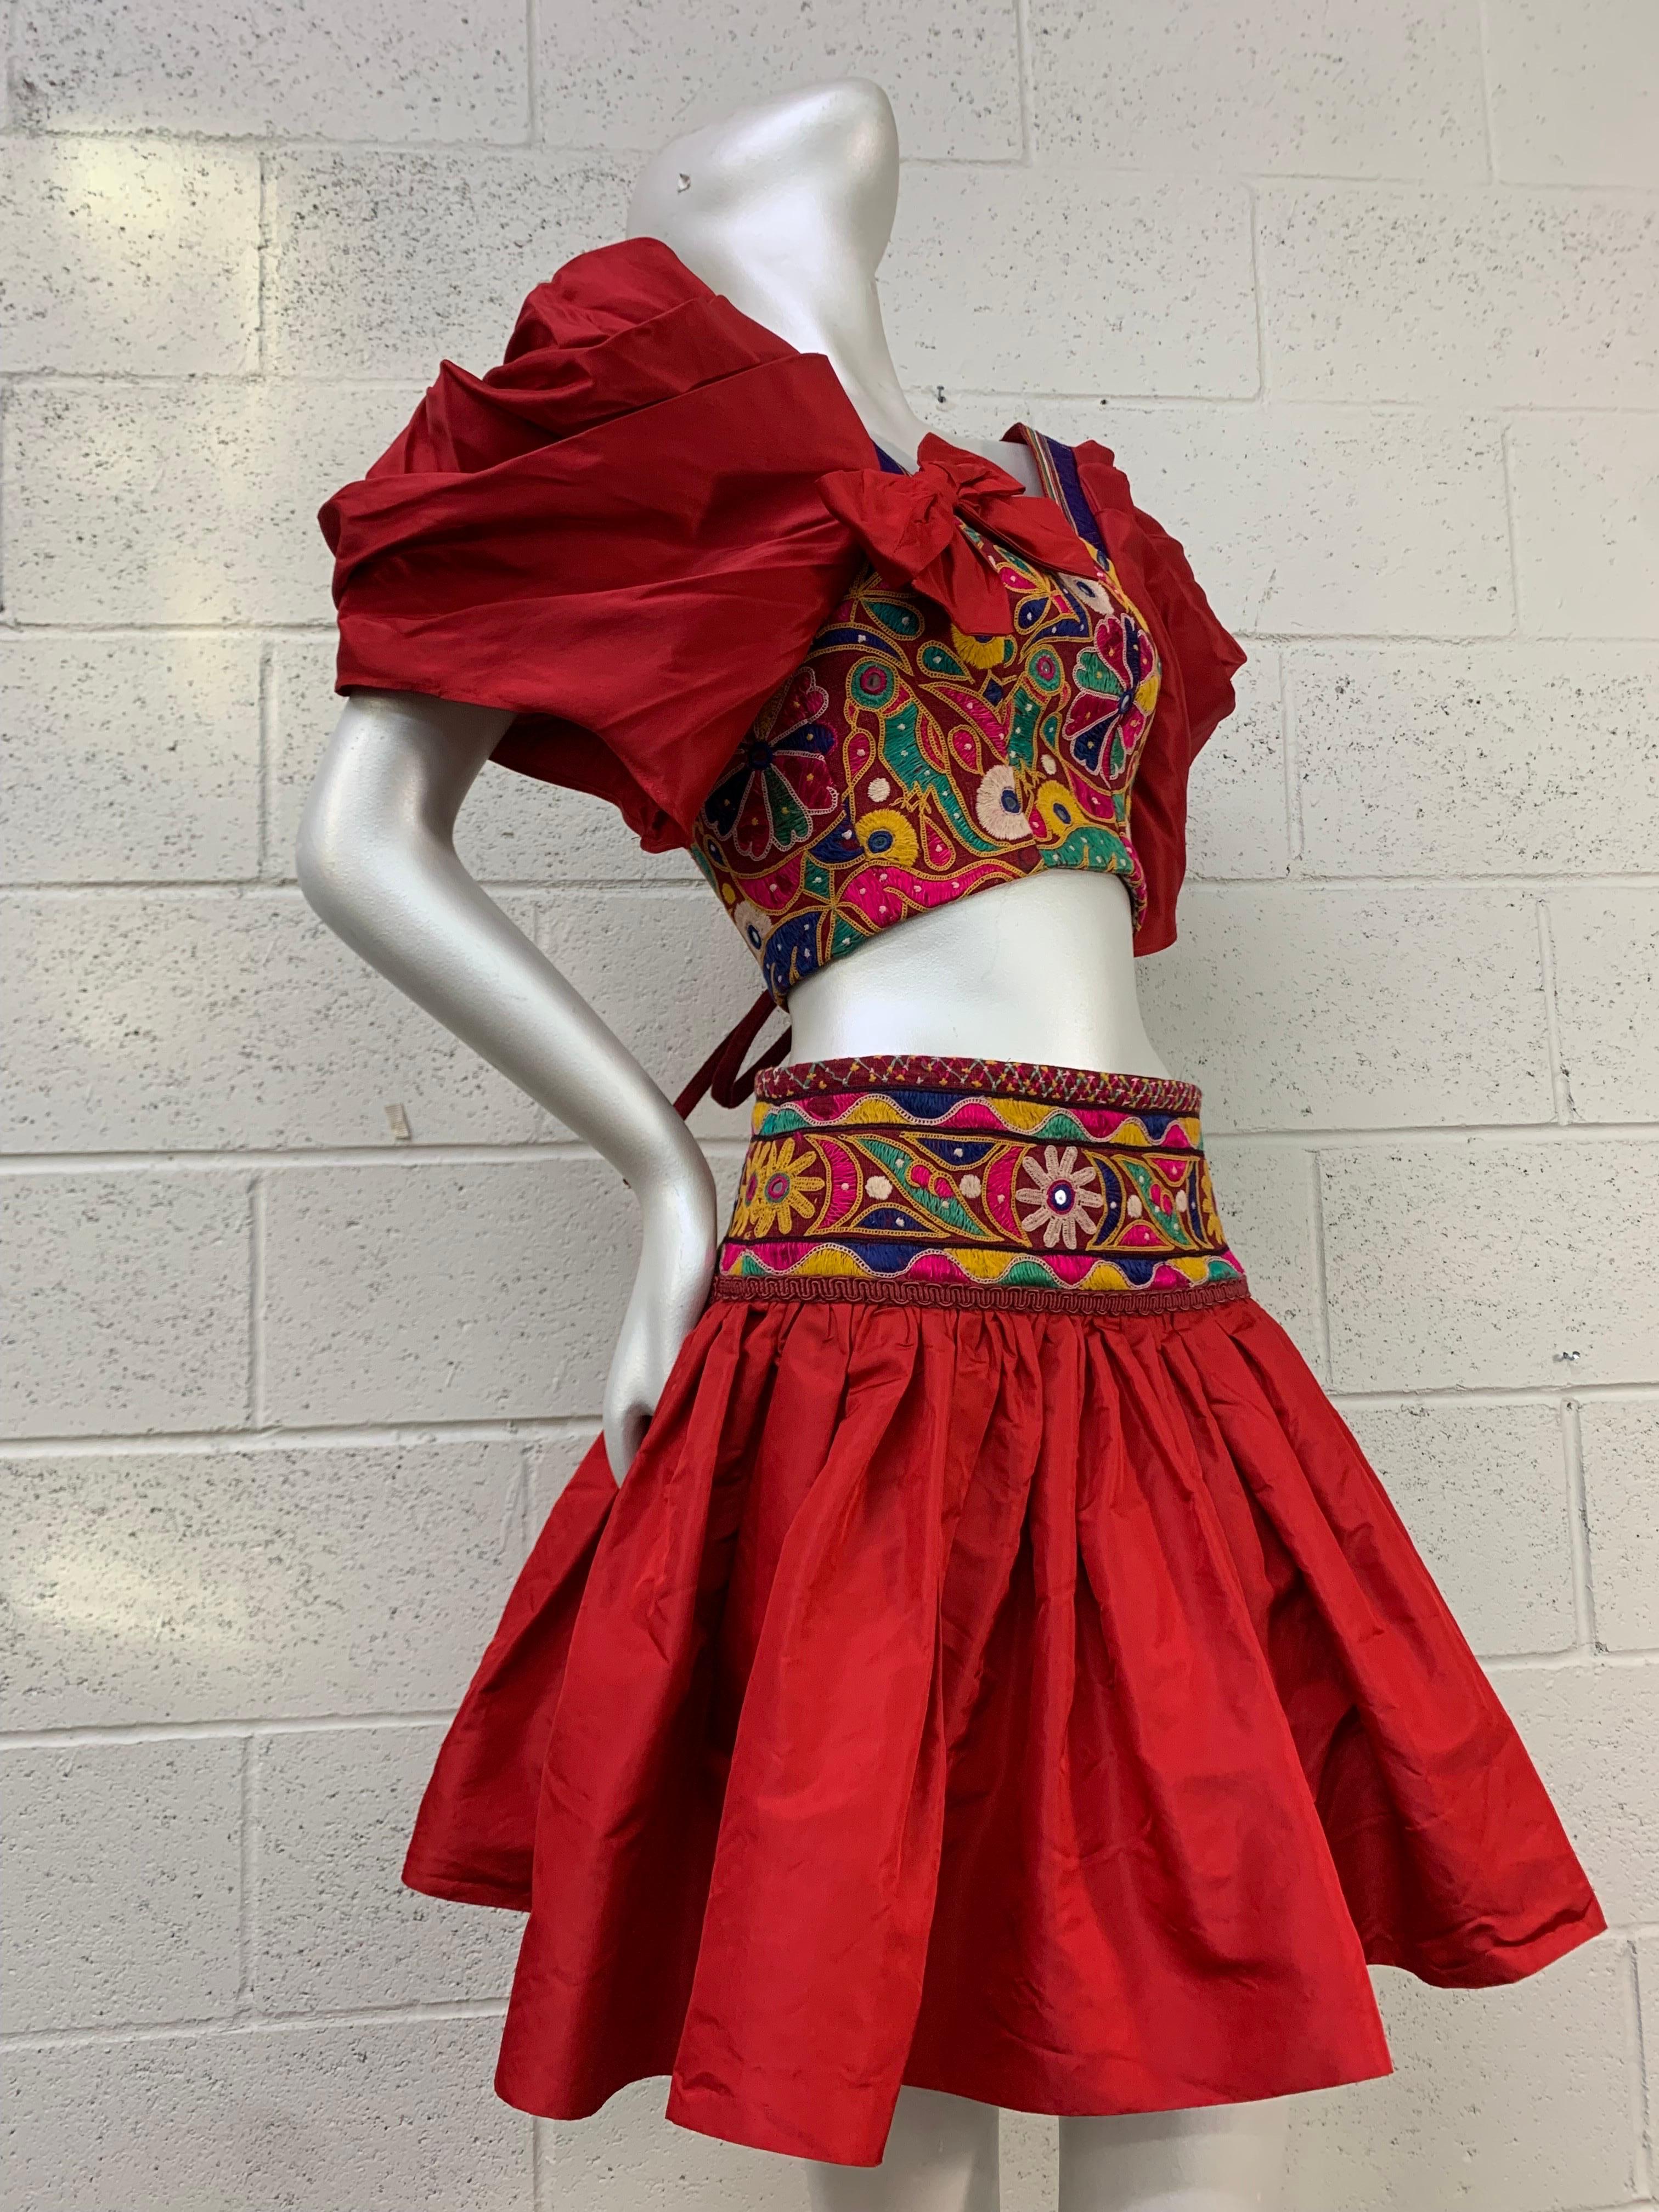 Torso Creations Crimson Silk Taffeta Mini Skirt & Corset-Style Blouse Ensemble: Indian floral embroidery with mirror insets contrasting with sleek silk in this fabulous Ensemble. Lacing up back of blouse. Skirt hooks on side to close with a wide